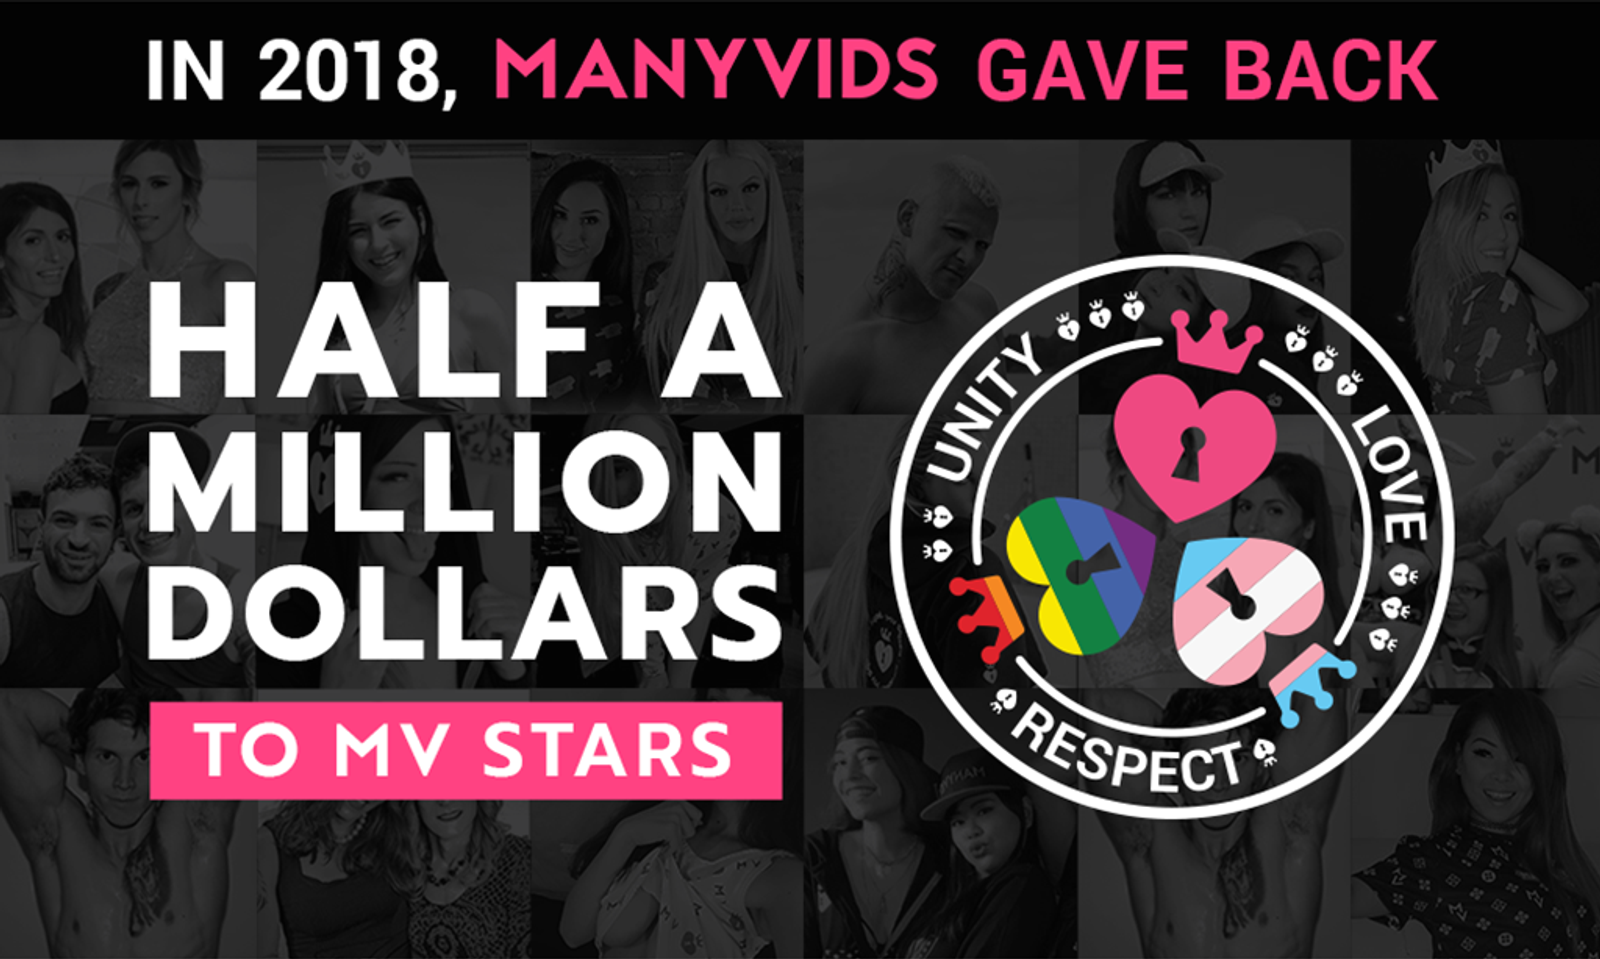 Content Creators Got $500,000 Back From ManyVids in 2018